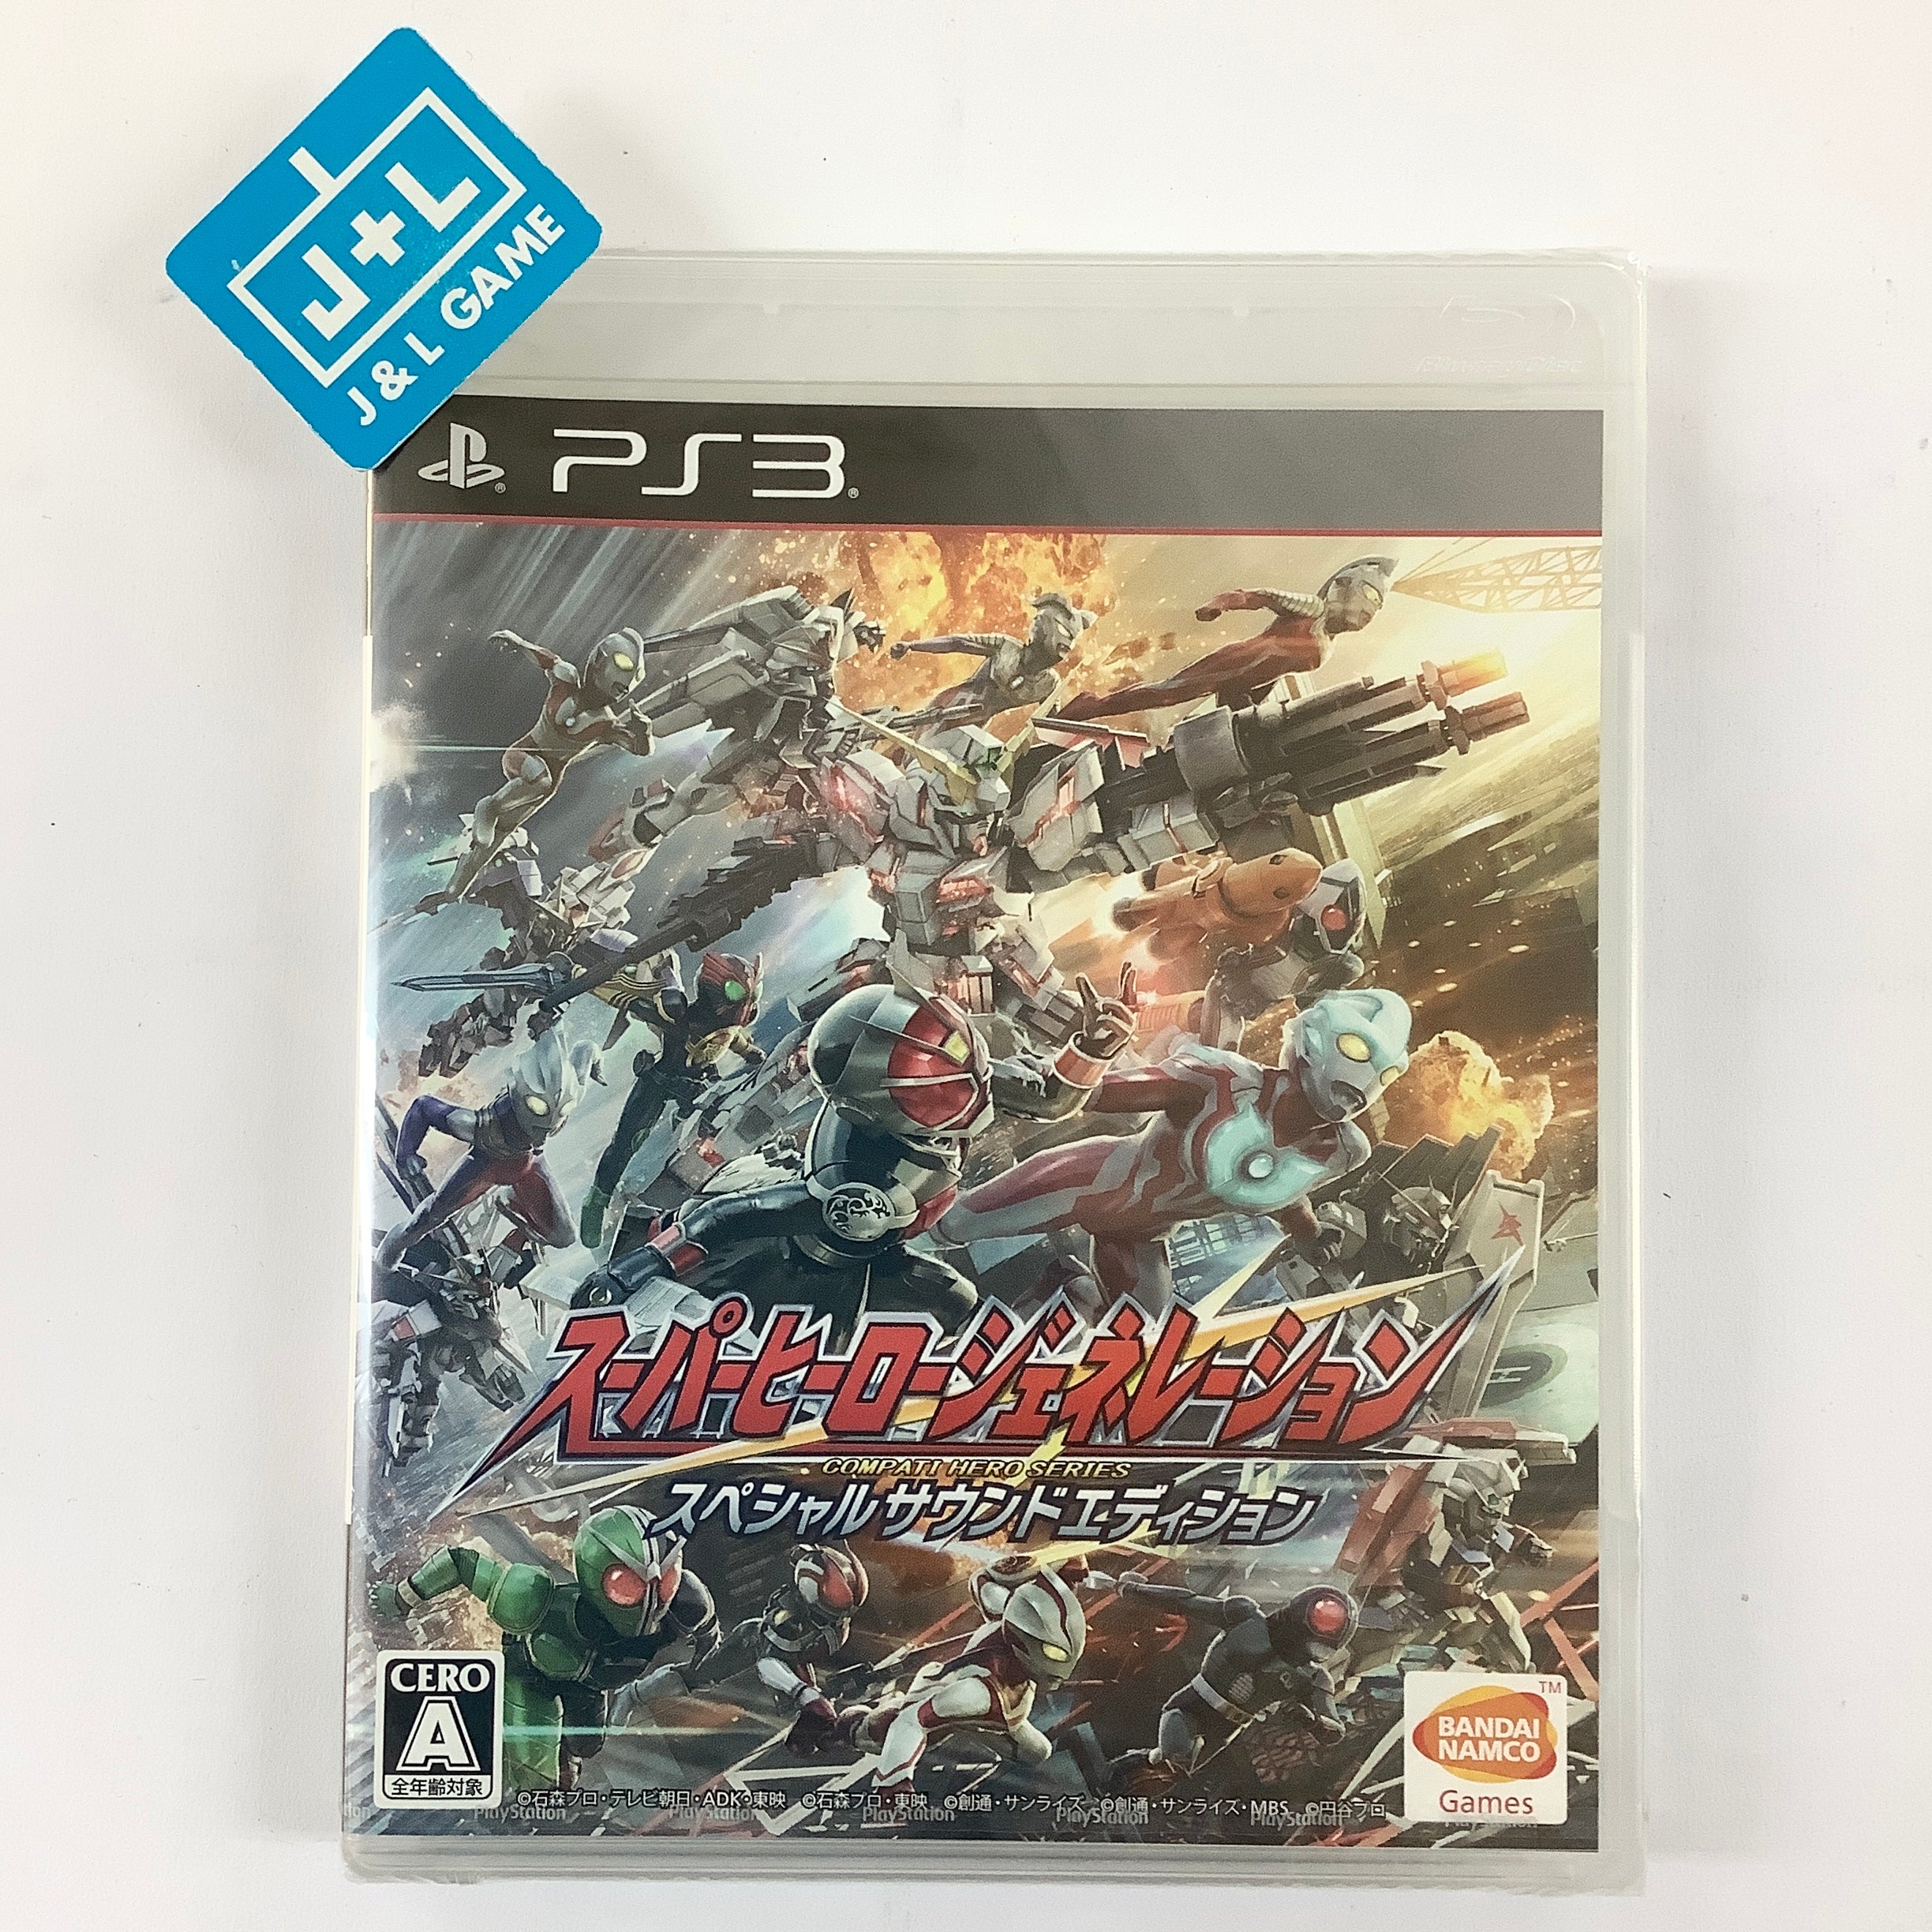 Super Hero Generation (Special Sound Edition) - (PS3) PlayStation 3 (Japanese Import) Video Games Bandai Namco Games   